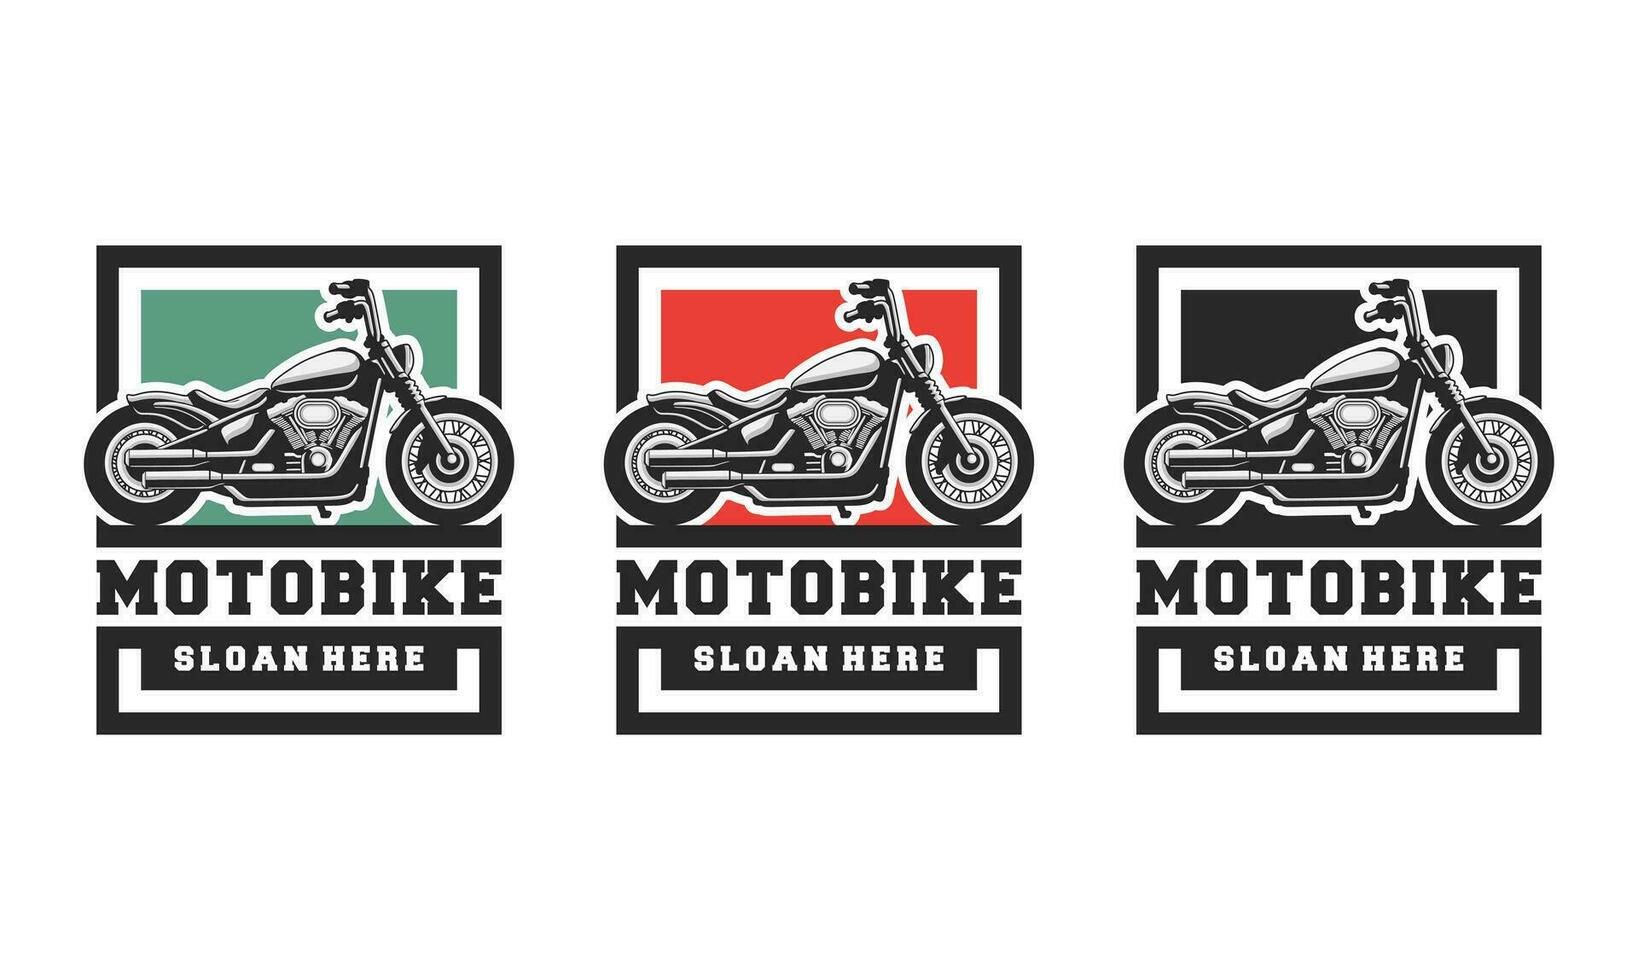 Motorcycle club logo design vector. Motorcycle logo illustration isolated. vector